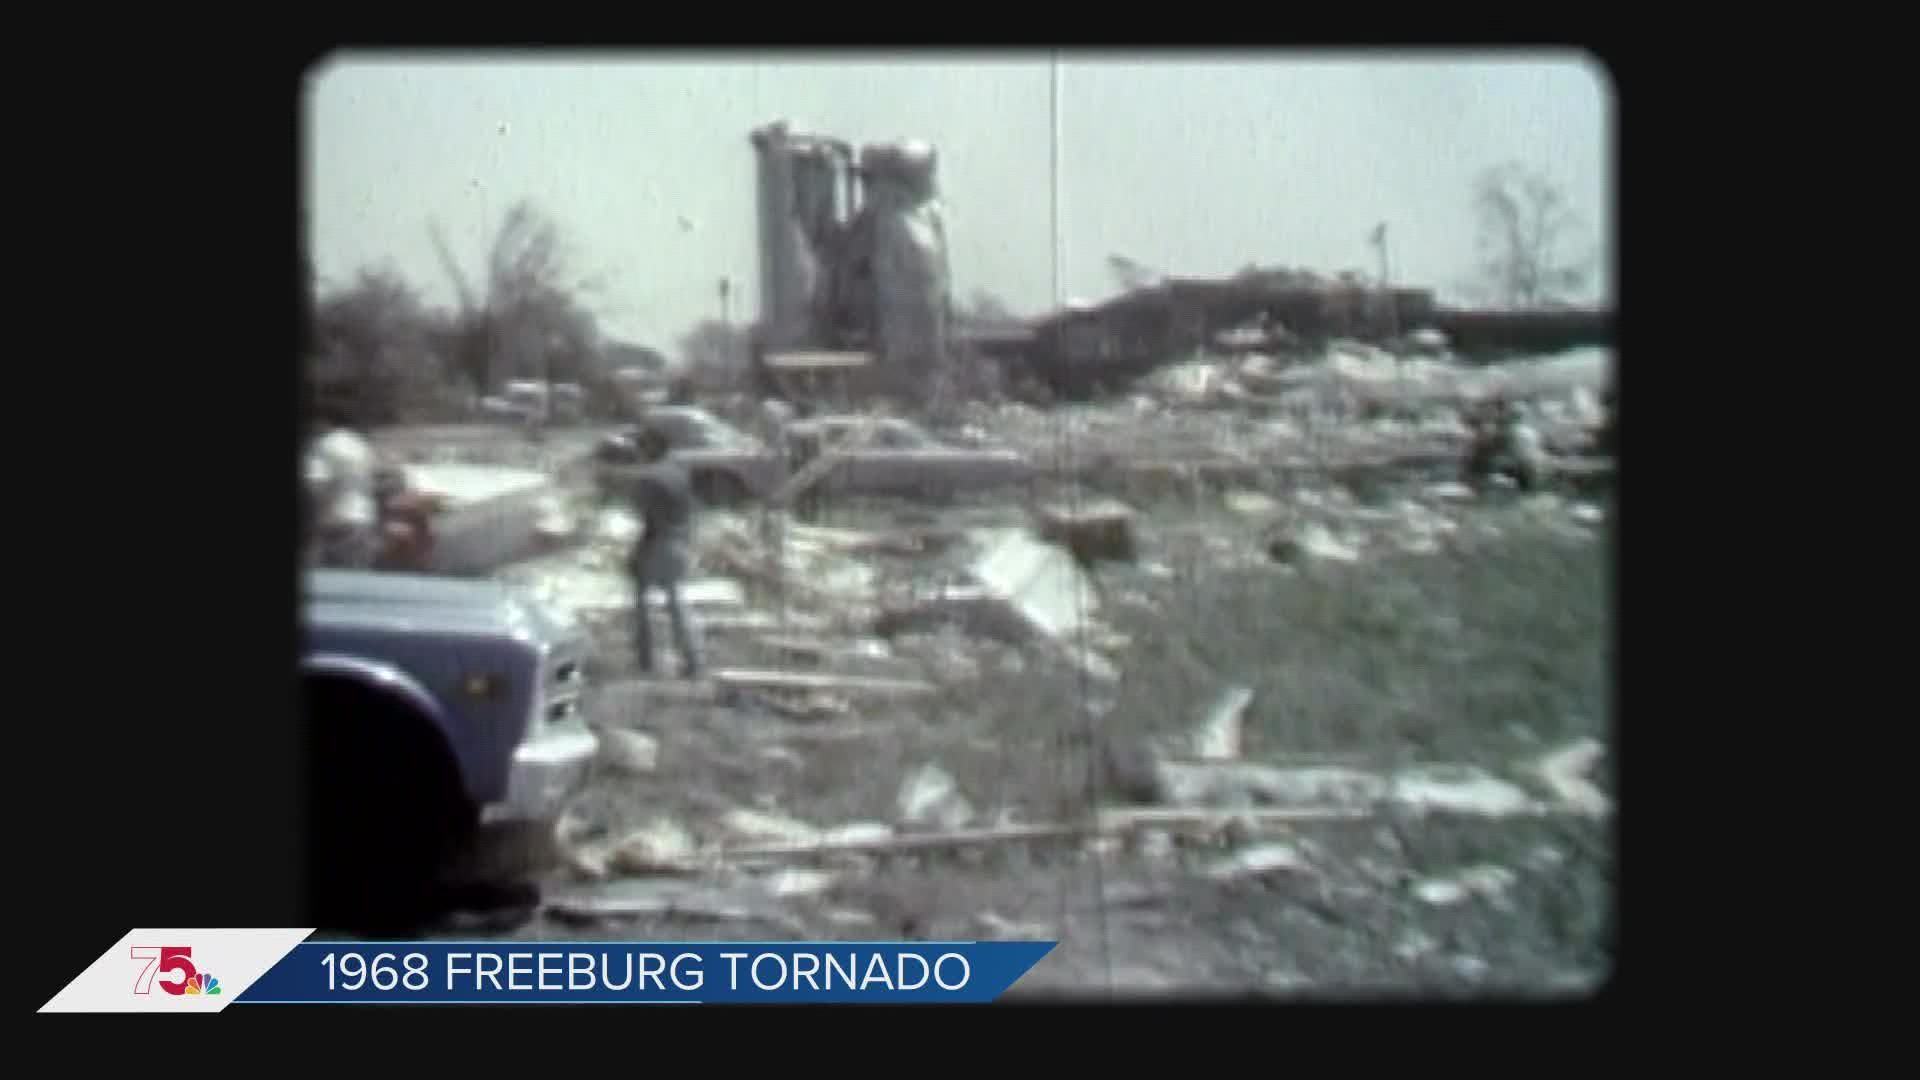 Springtime in St. Louis means the threat of severe weather. More than 50 years ago, one Illinois town got hit by back-to-back twisters.